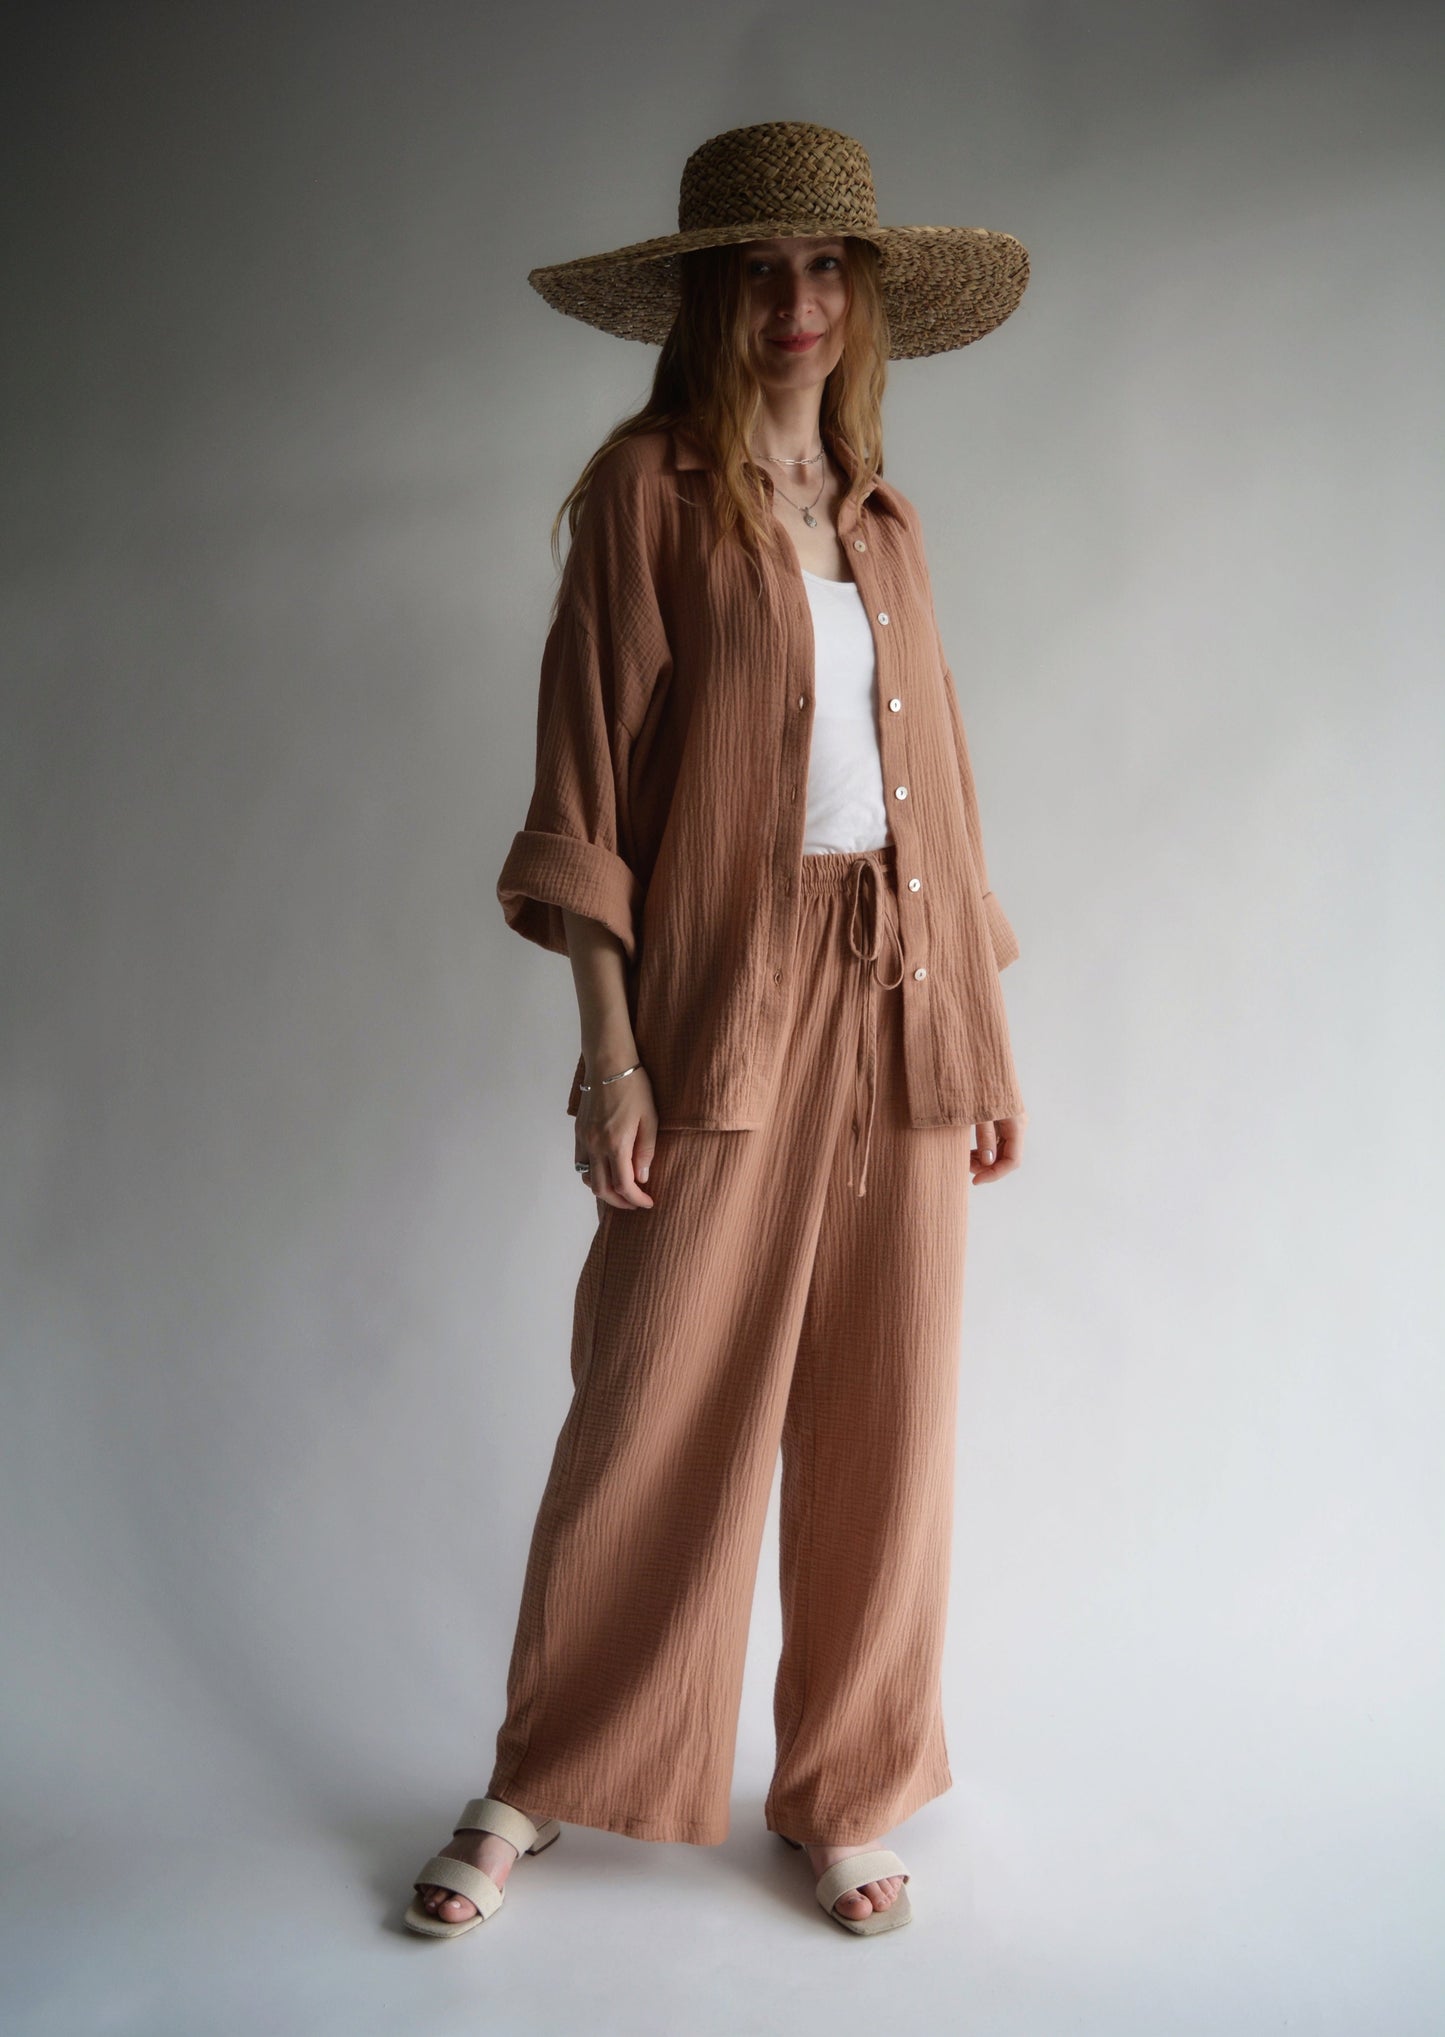 Cotton Muslin  Two-Piece Set: Shirt and Pants in Blush Brown color